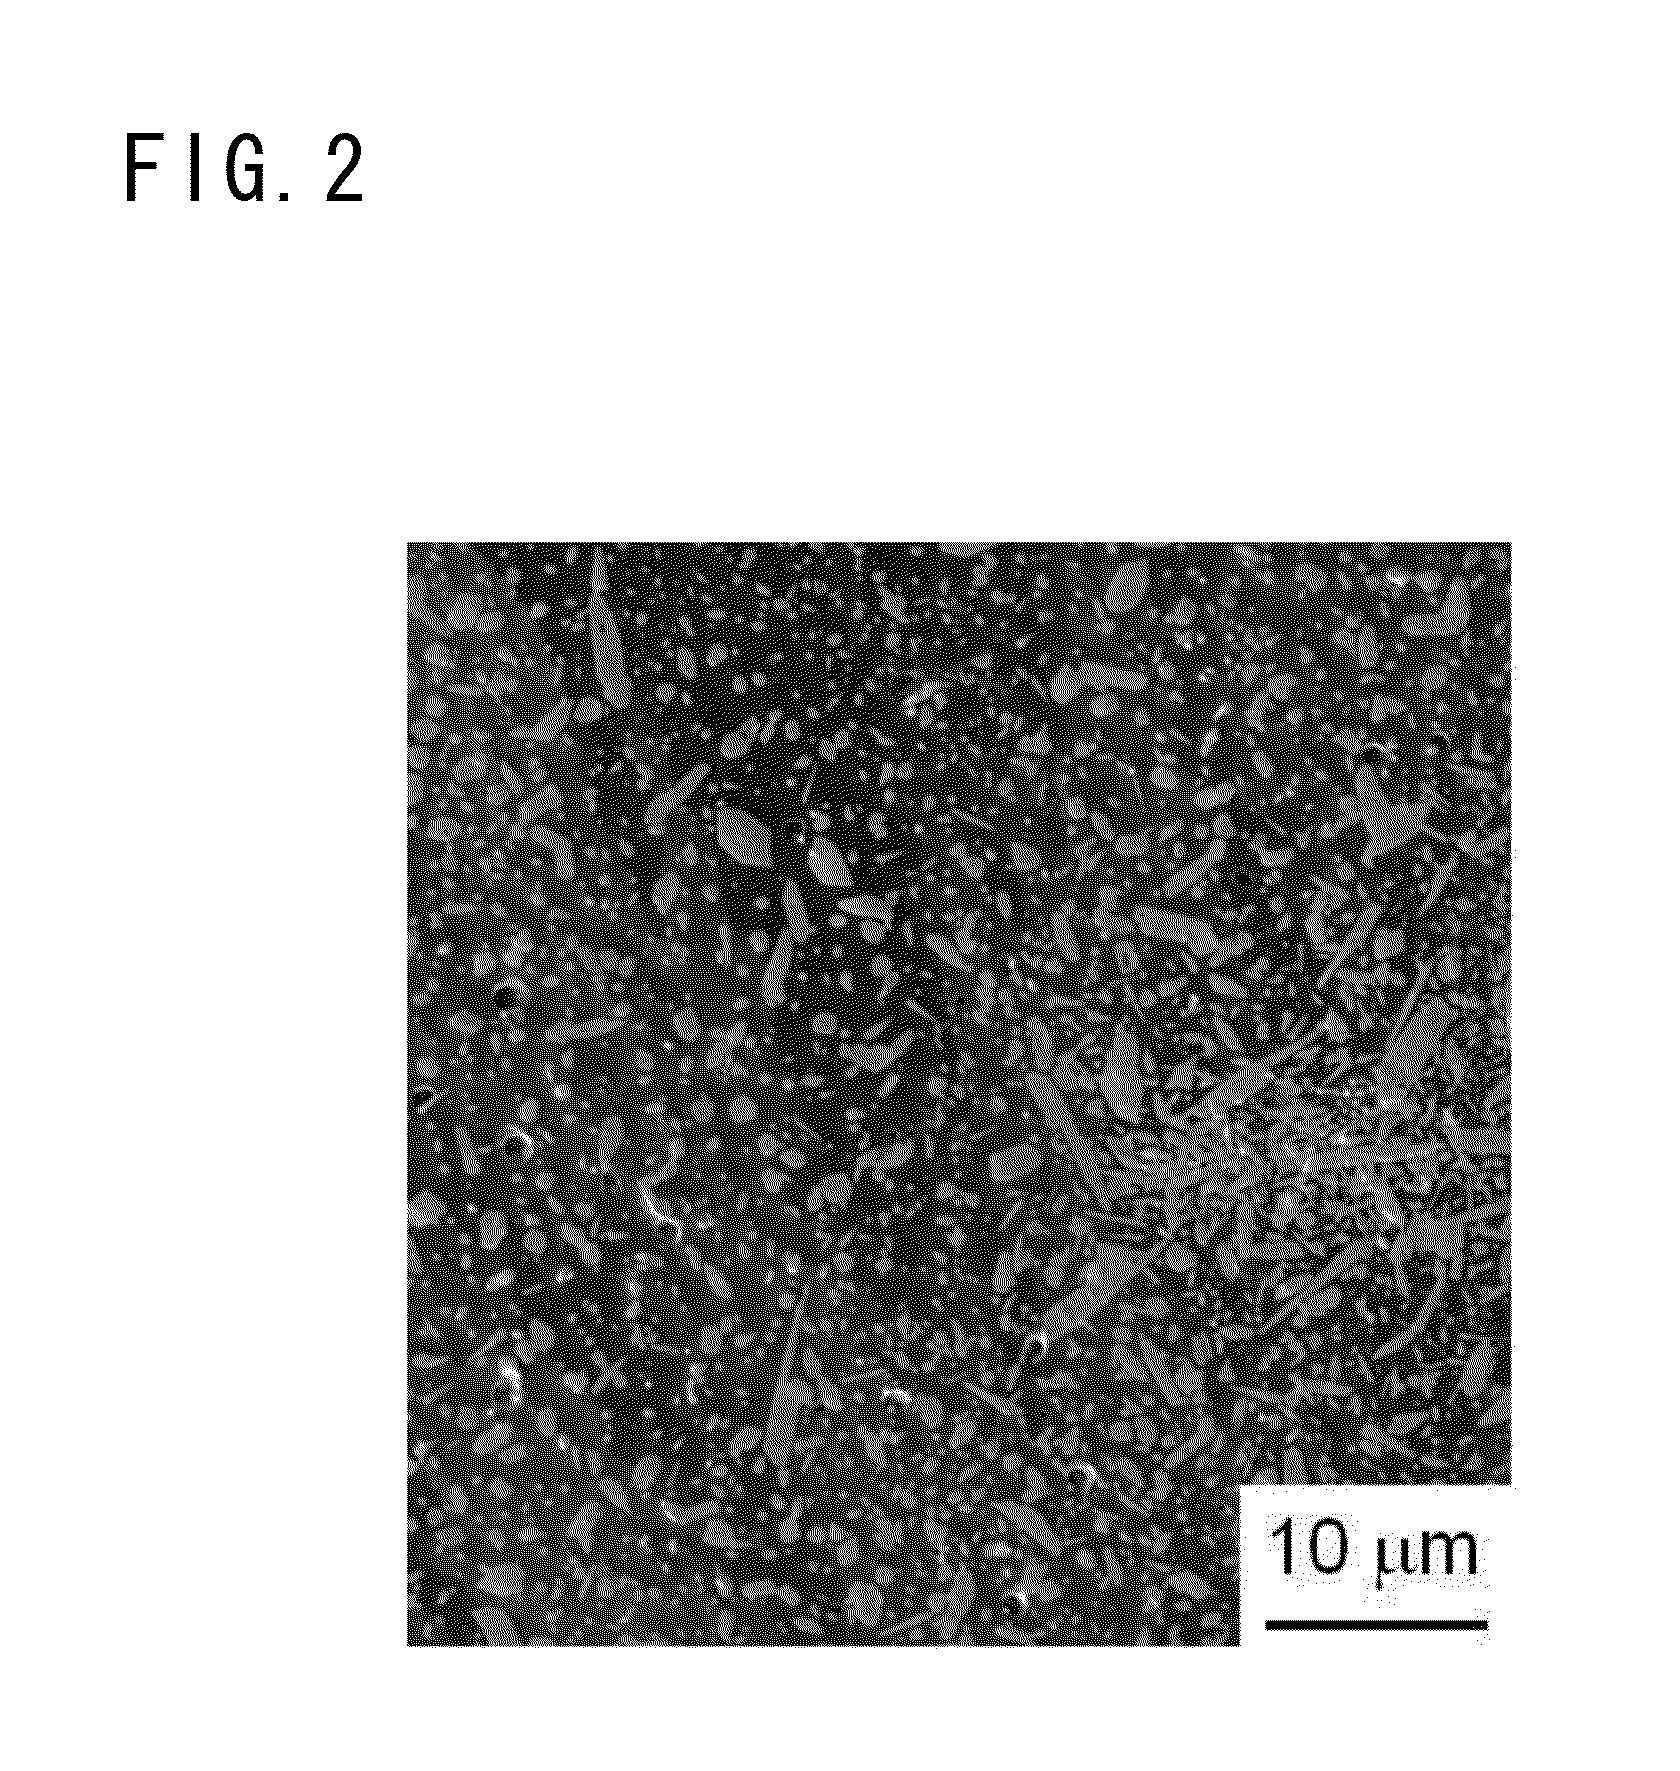 Tin-plated copper-alloy material for terminal and method for producing the same